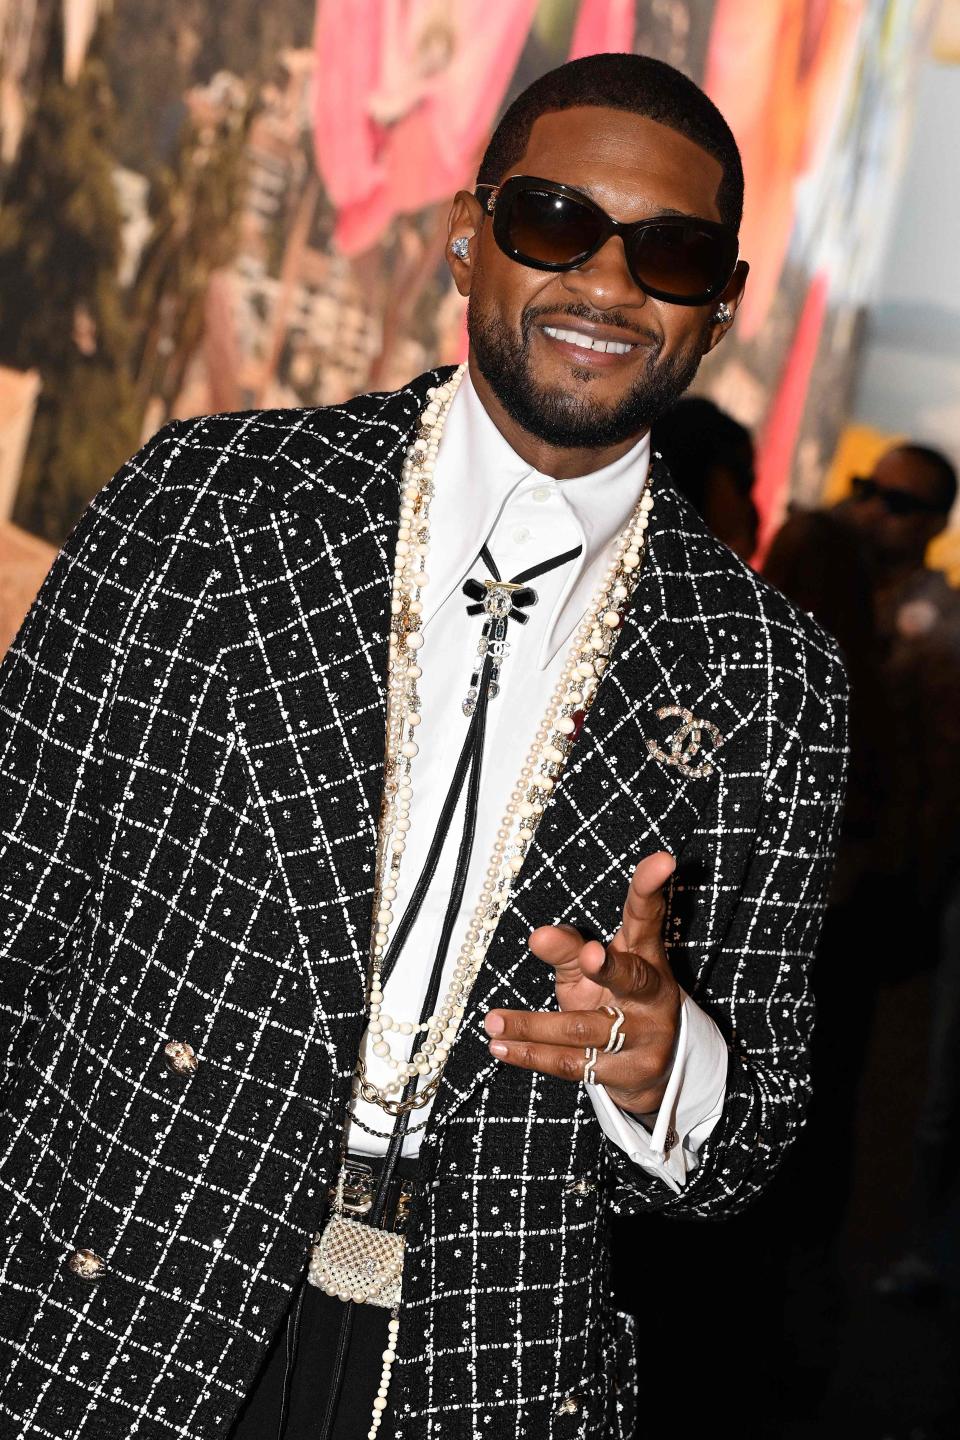 Usher will headline the Super Bowl halftime show next month.